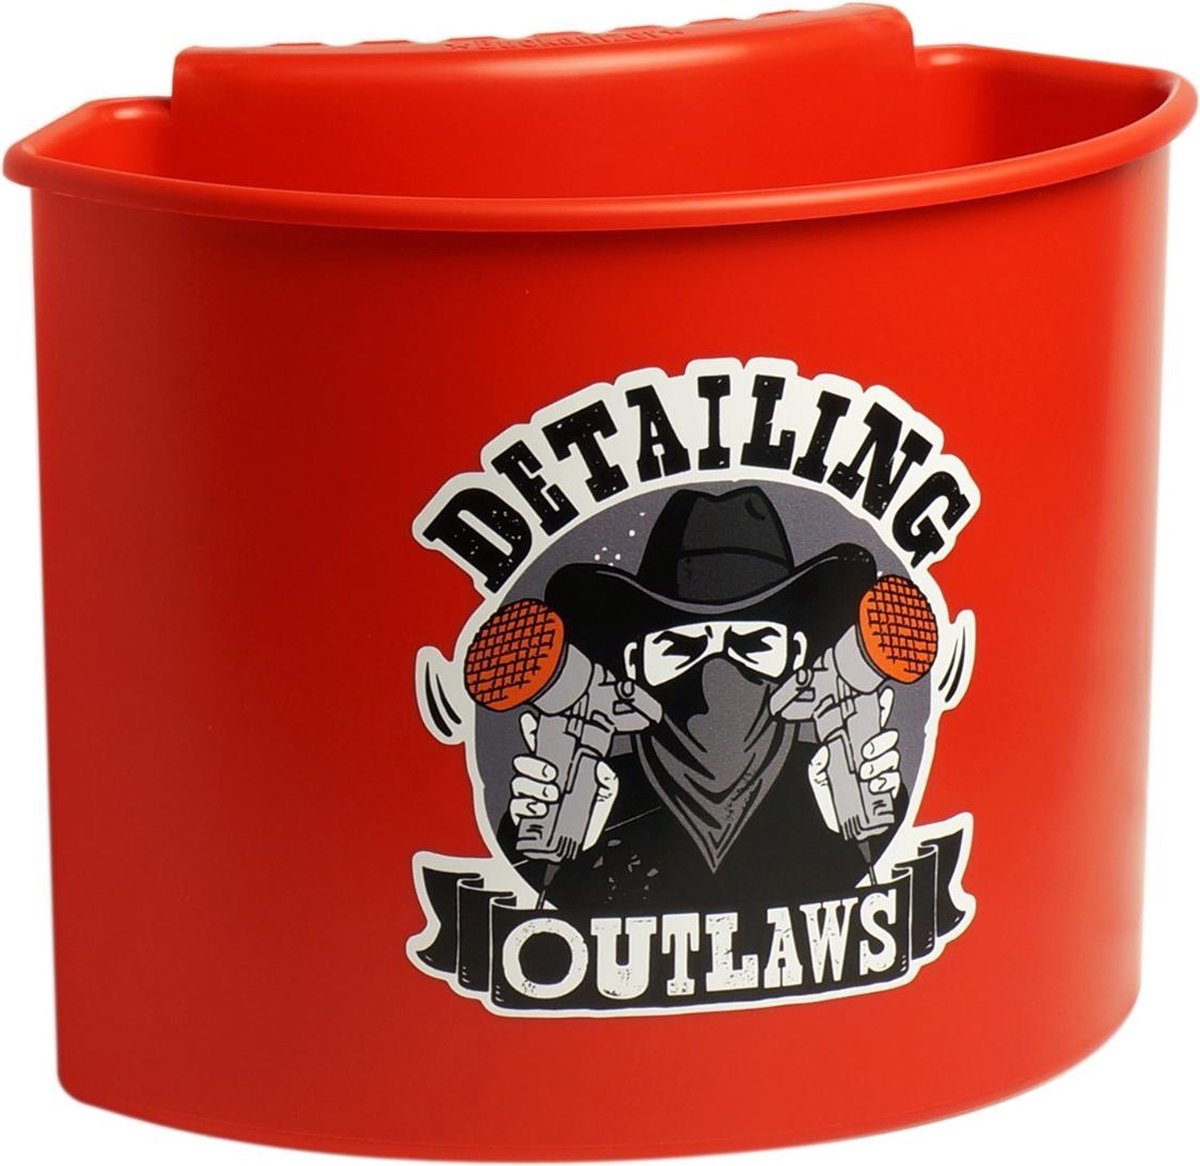 Detailing Outlaws Buckanizer - Rood